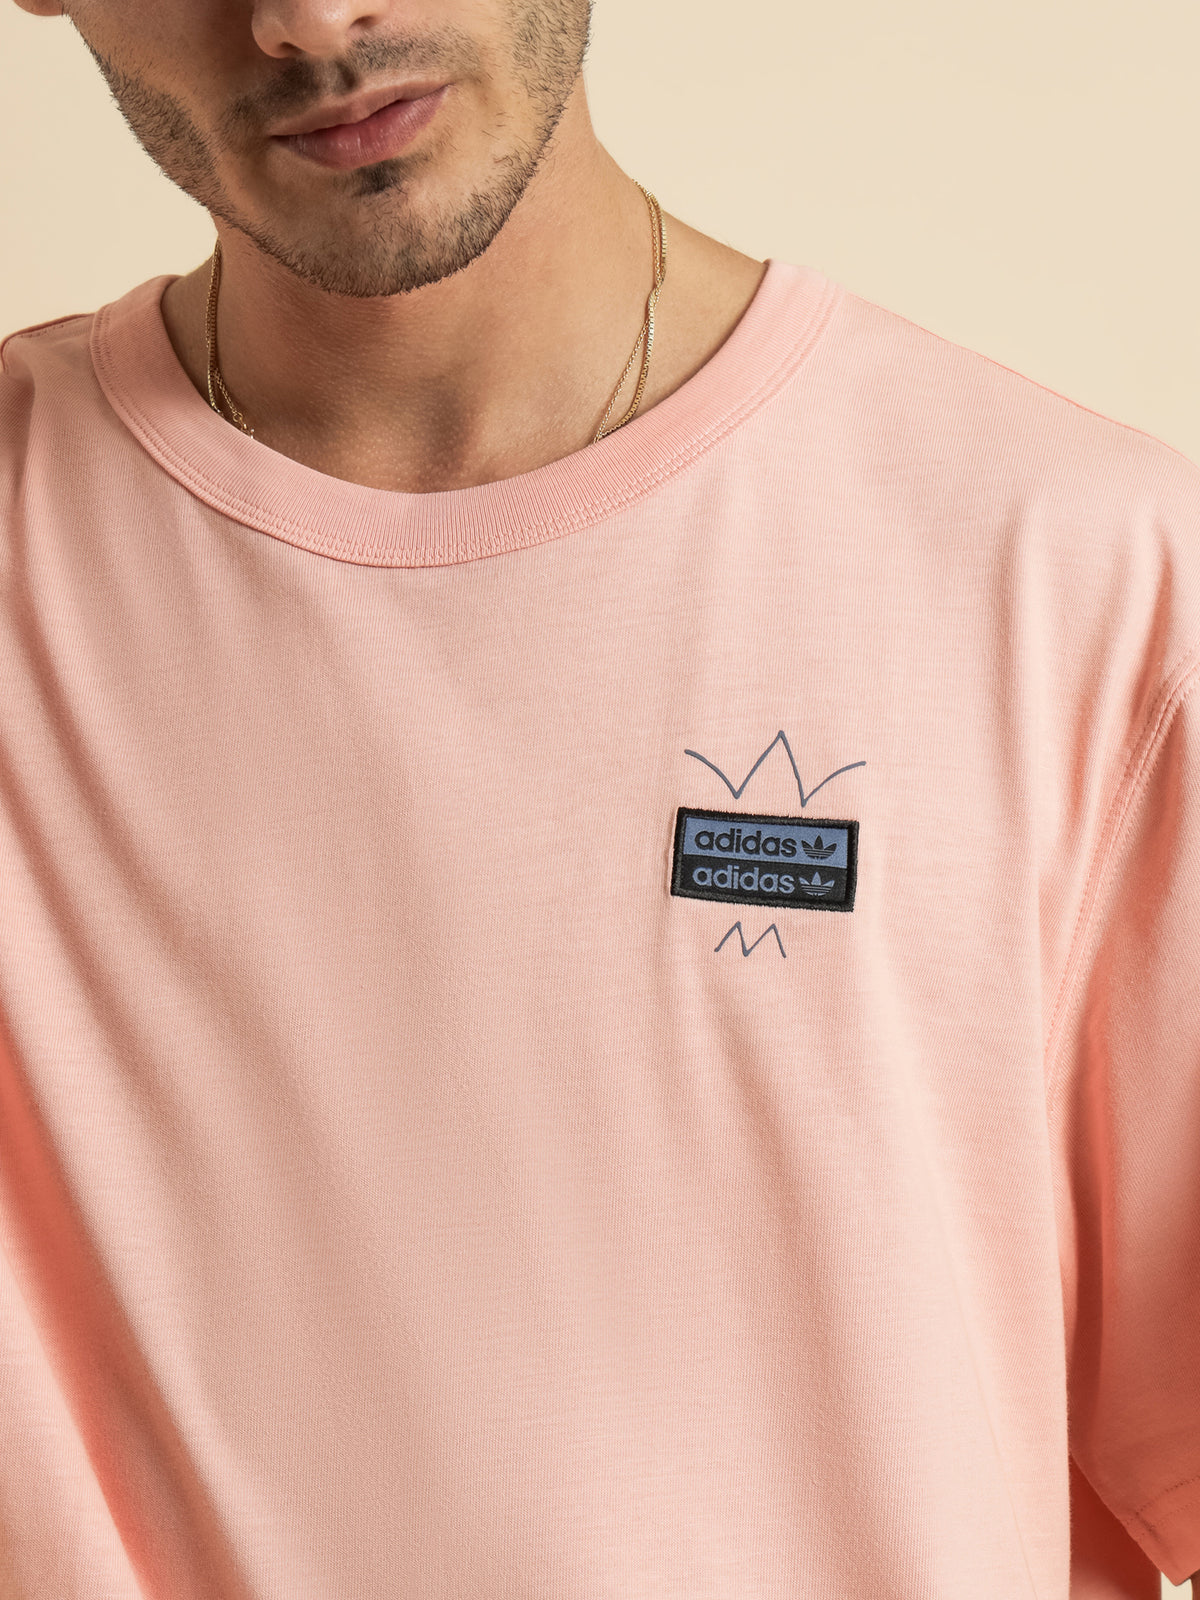 R.Y.V Abstract Original T-Shirt in Dust Pink